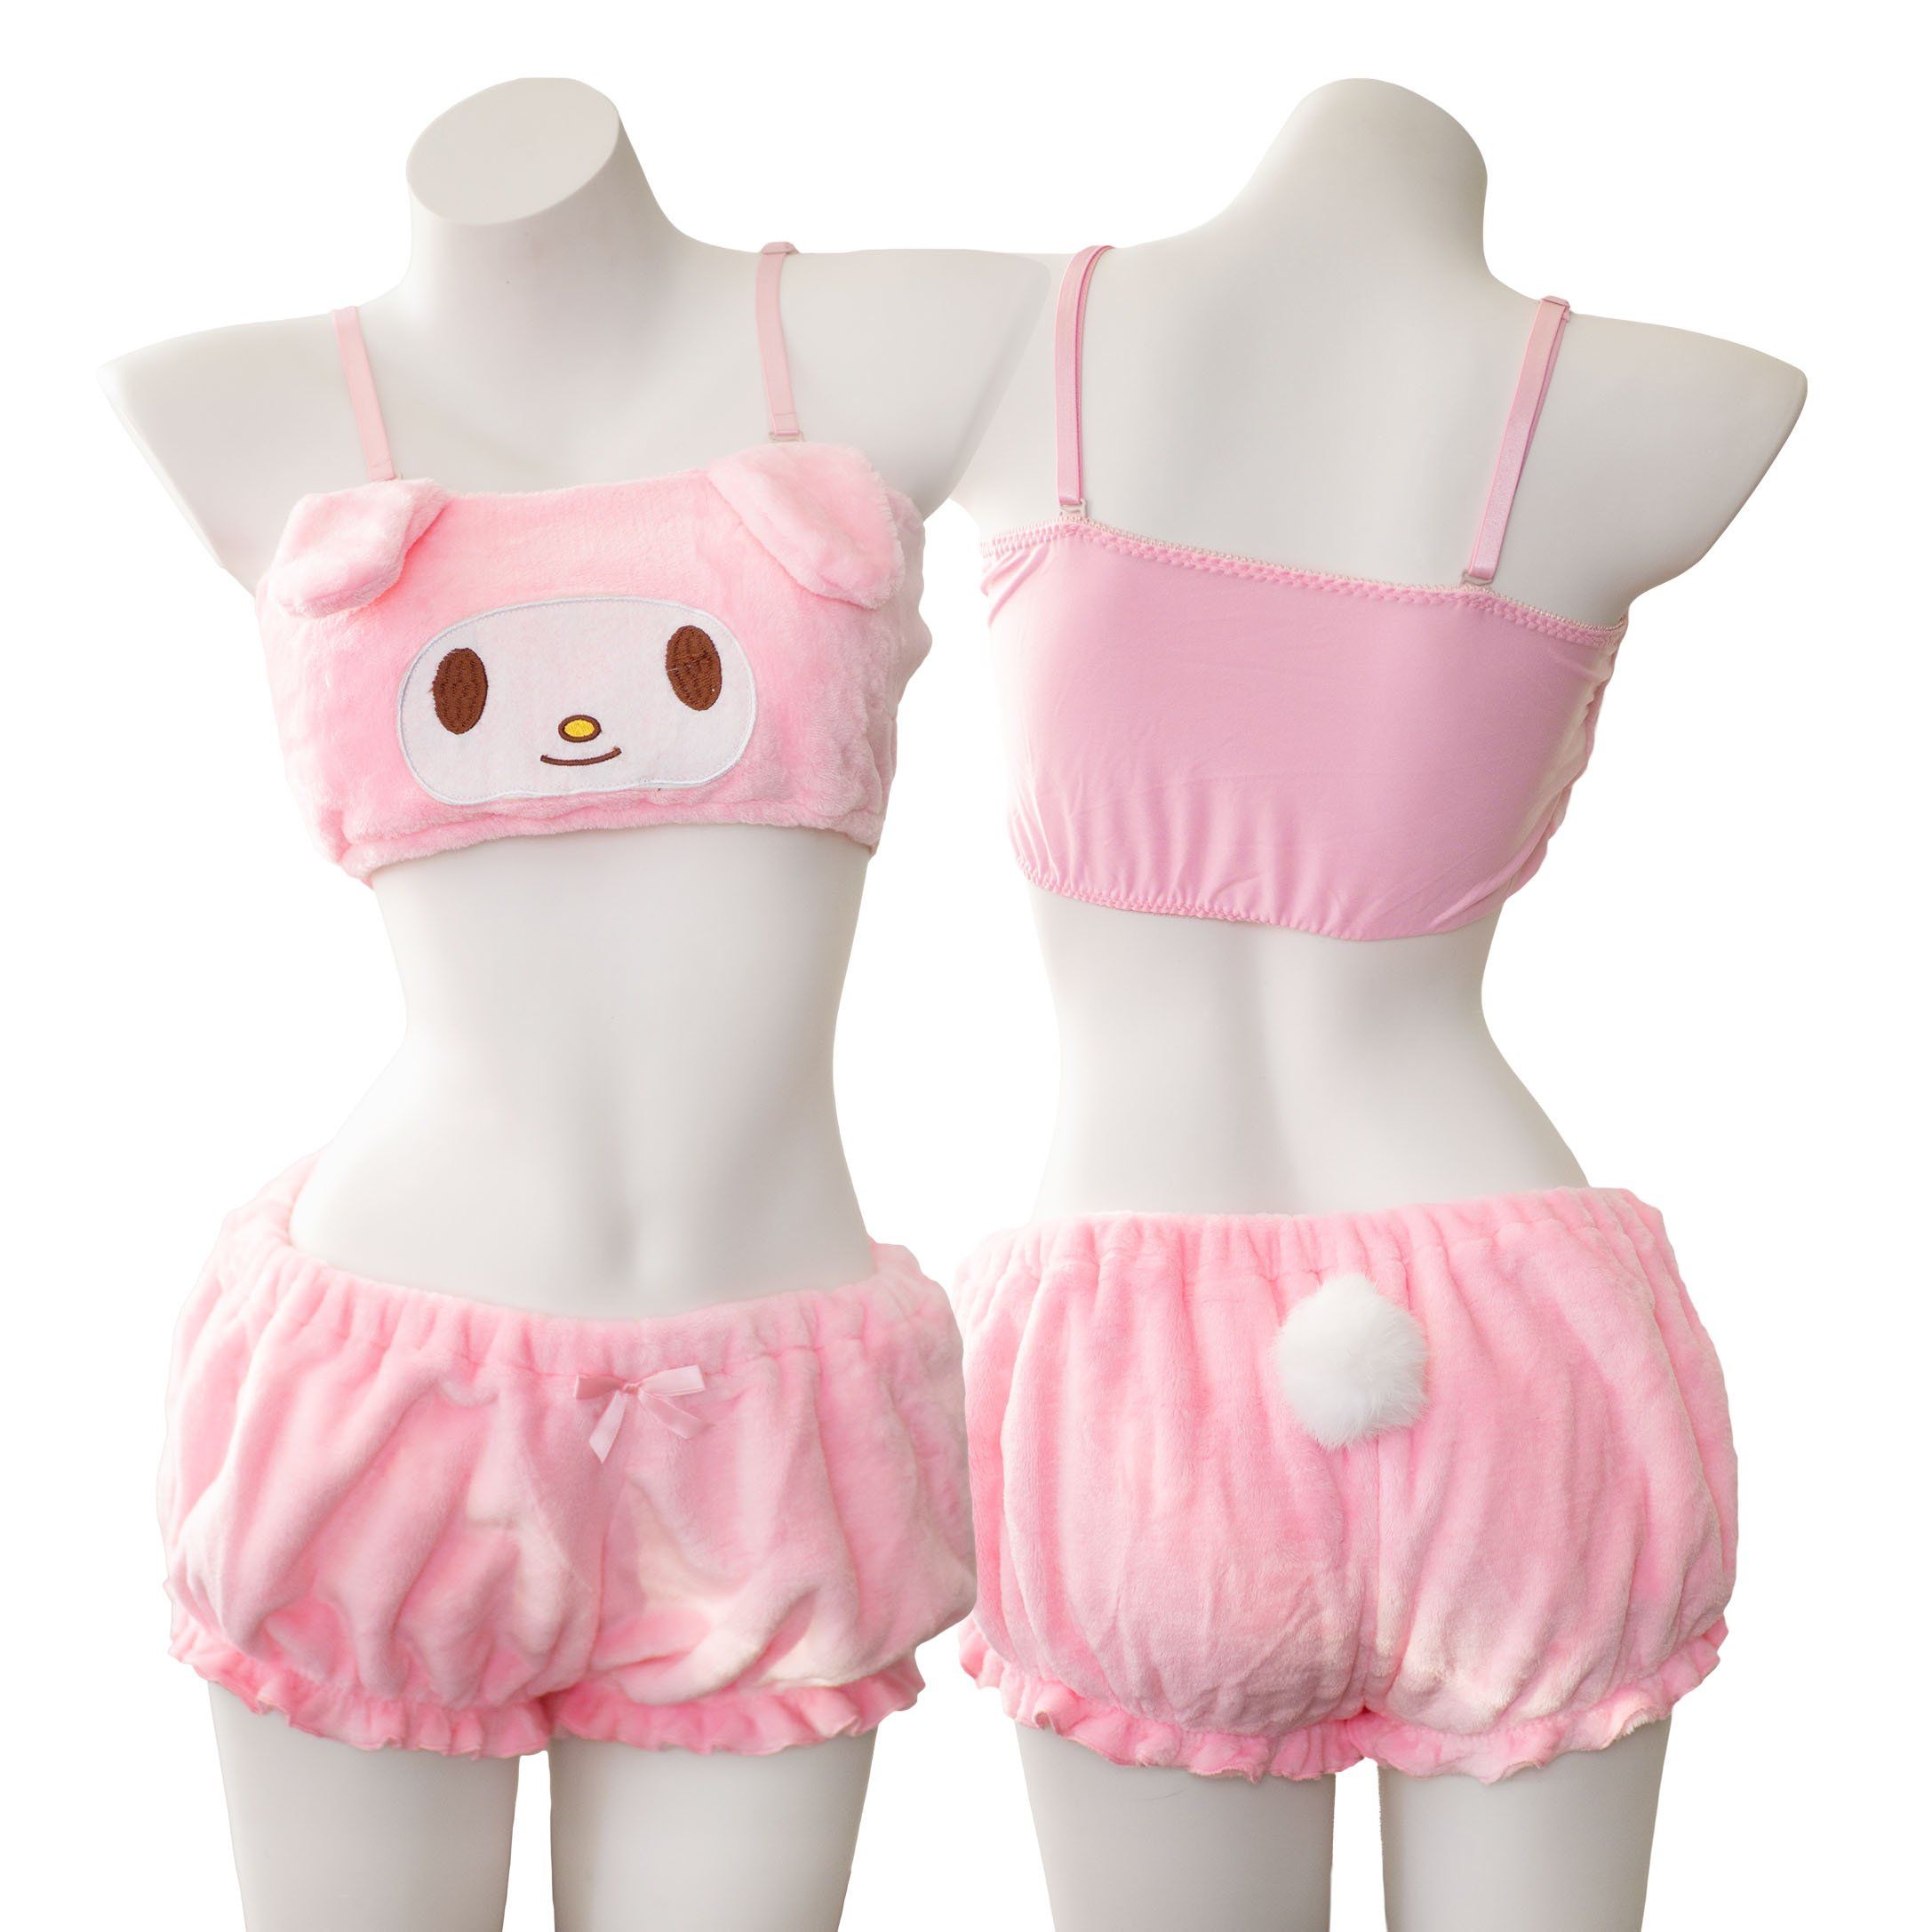 Japanese Anime Pink Kawaii My Melody Lingerie SD00192 – SYNDROME